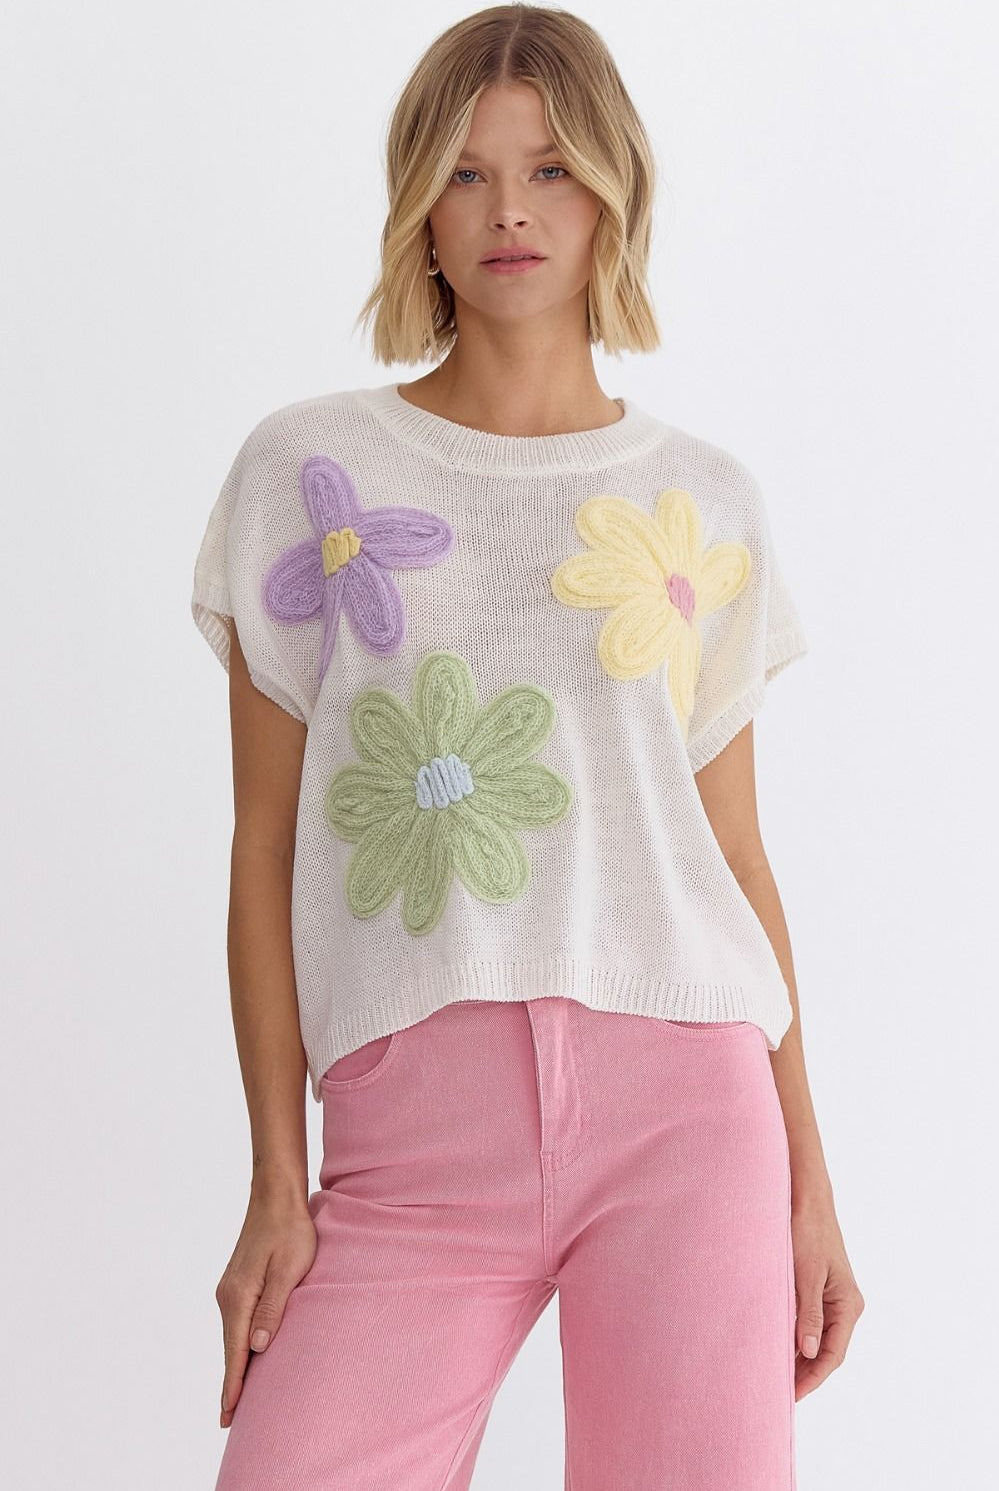 Sunny Flower Detail Round Neck Rib Detail Top - Be You Boutique